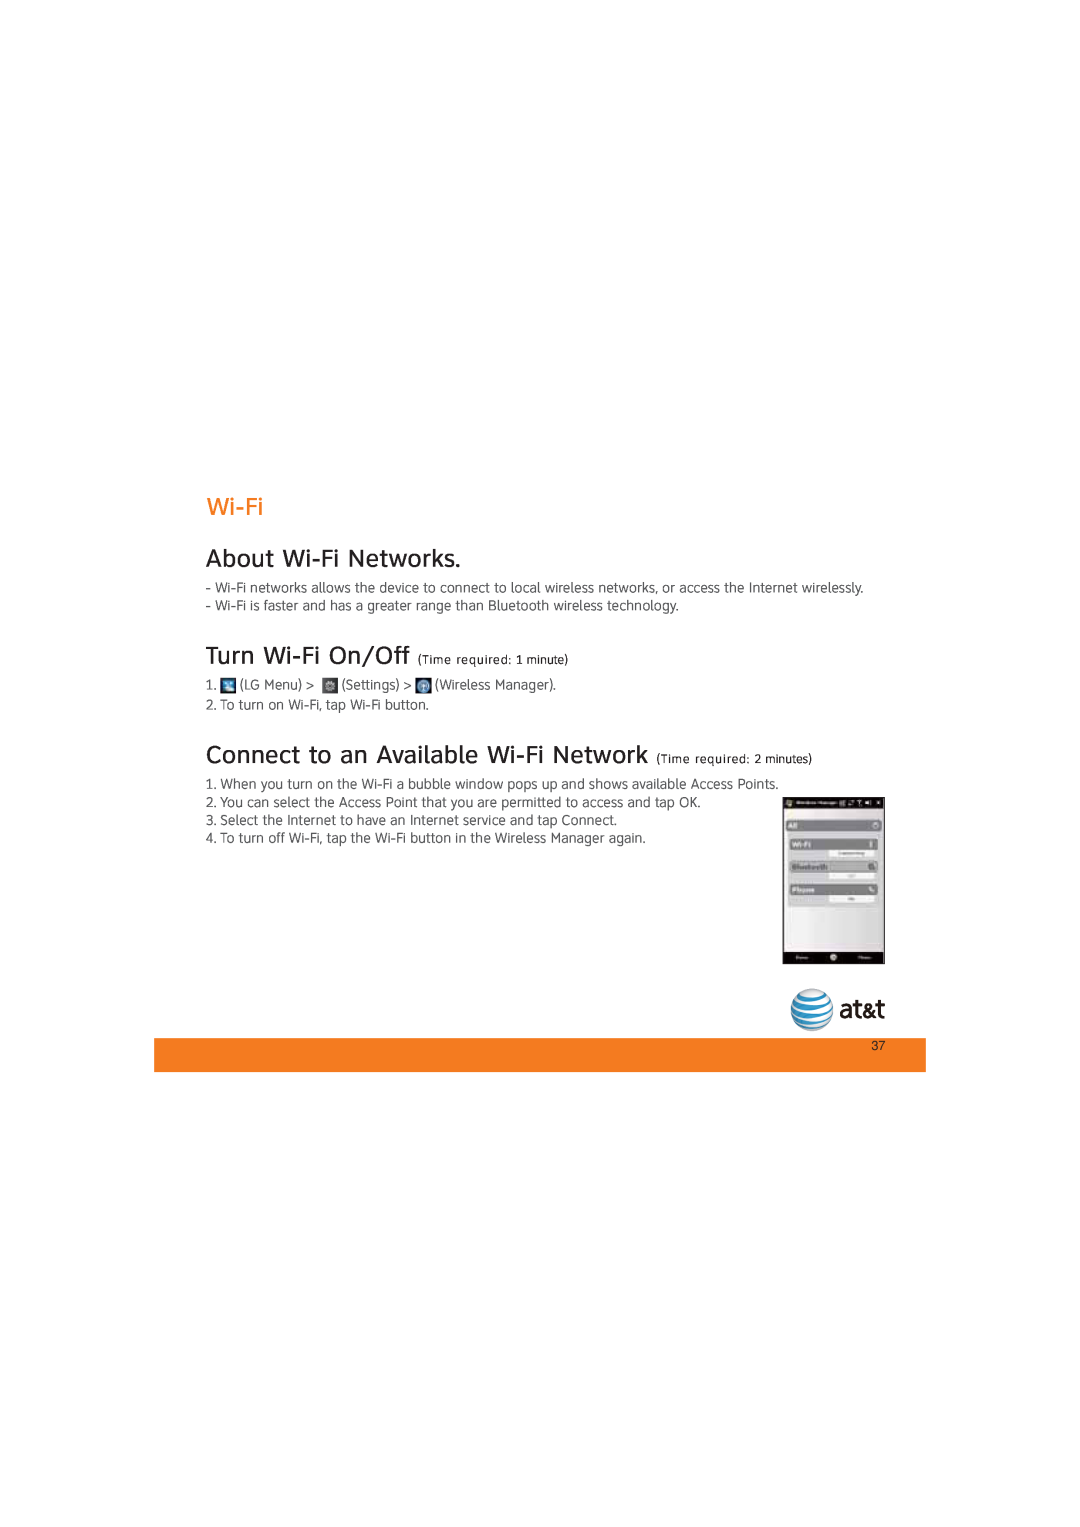 LG Electronics MCD0009405 About Wi-Fi Networks, Connect to an Available Wi-Fi Network Time required 2 minutes 